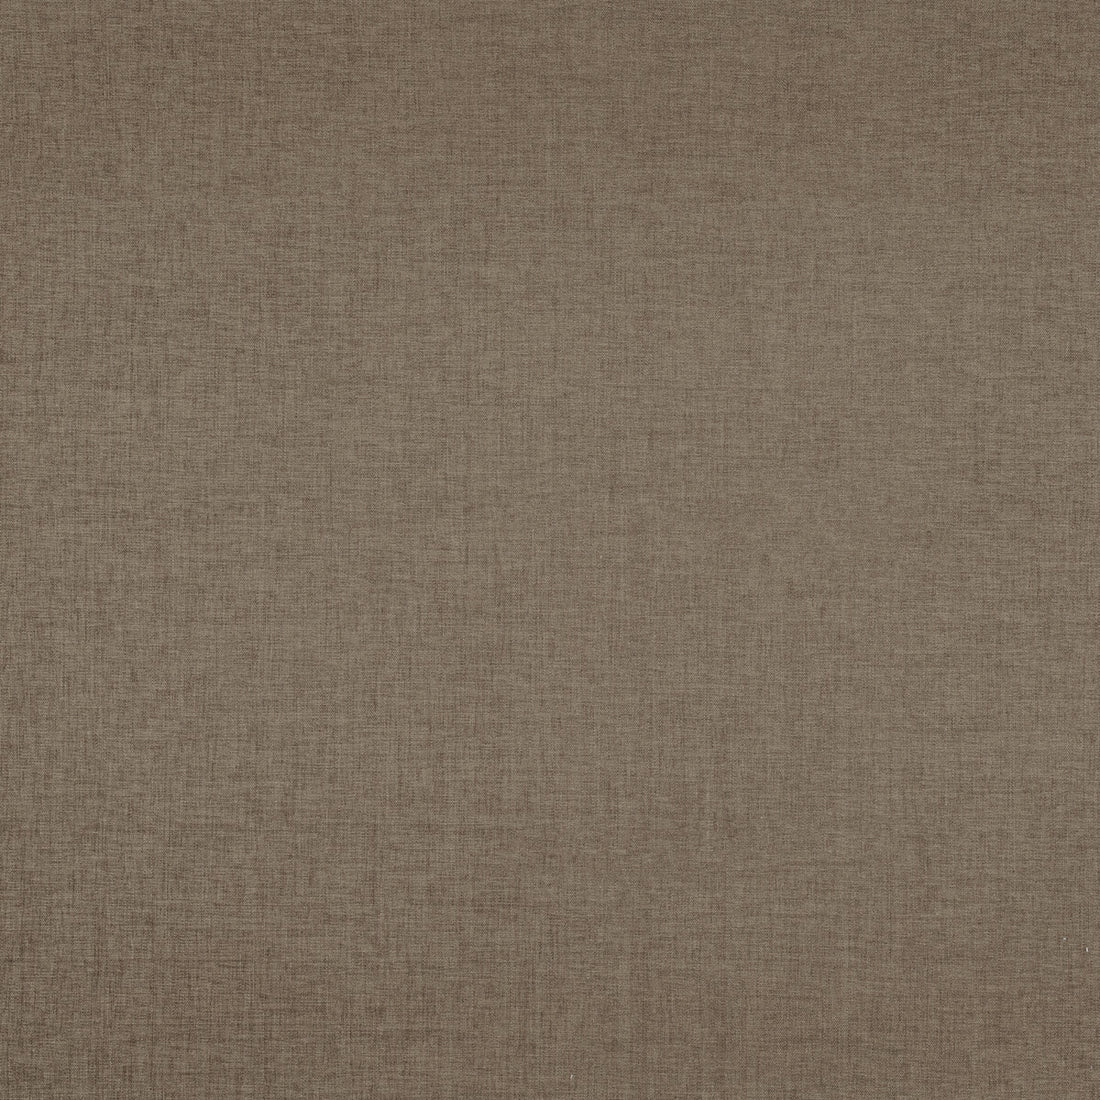 Kravet Smart fabric in 36095-106 color - pattern 36095.106.0 - by Kravet Smart in the Eco-Friendly Chenille collection